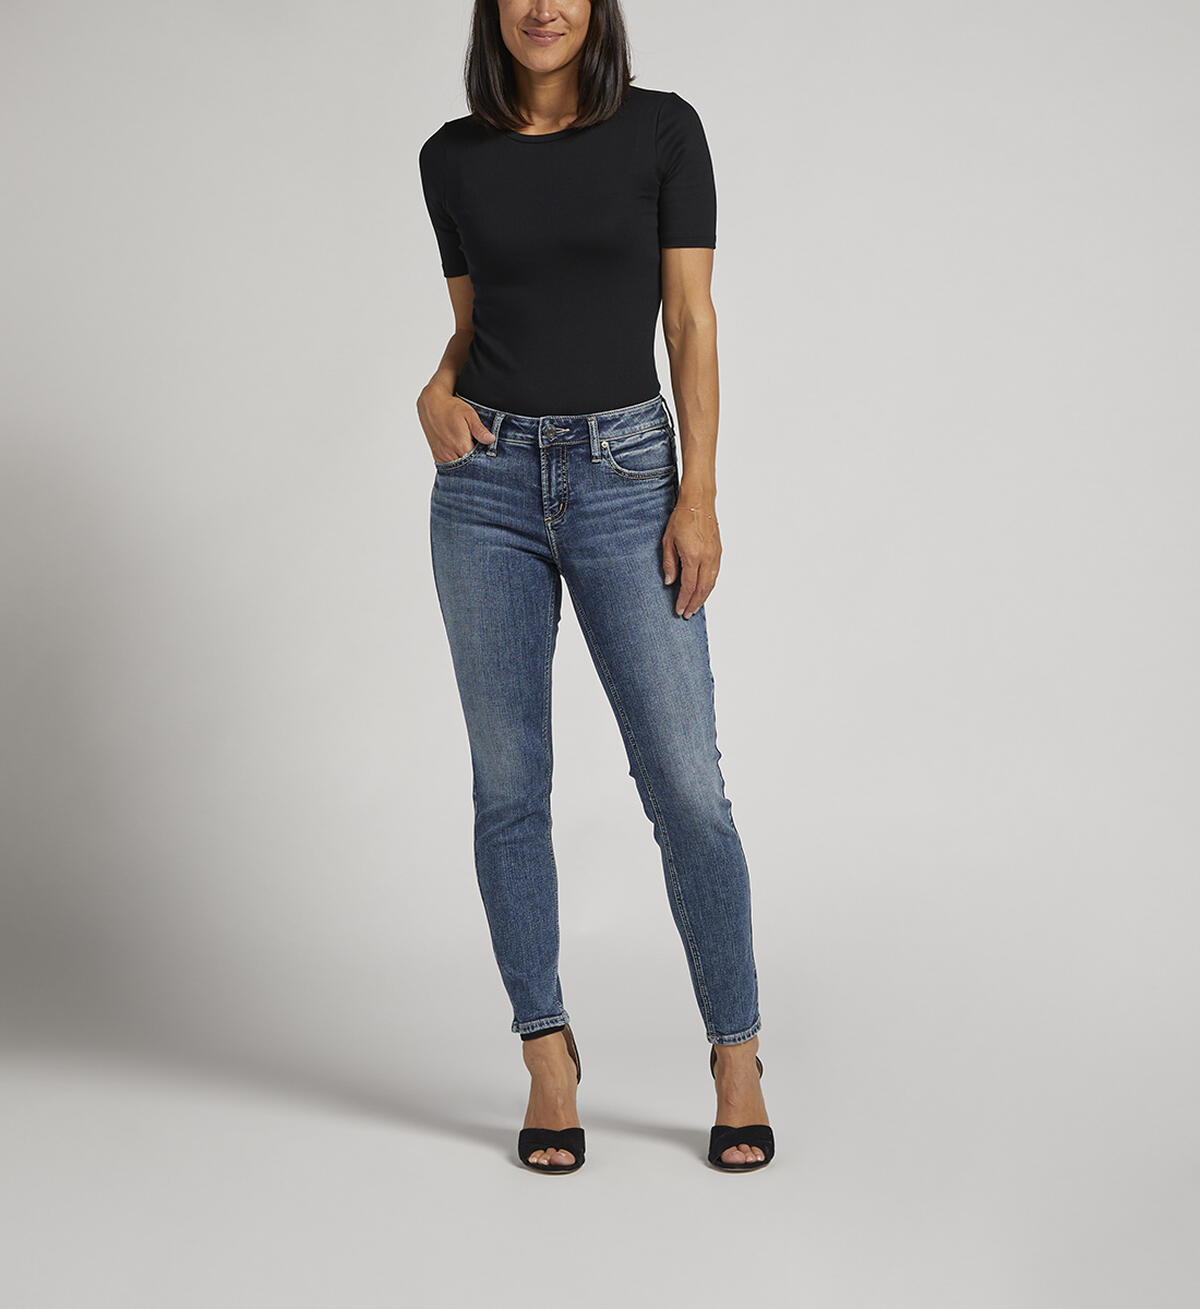 Buy Elyse Mid Rise Skinny Jeans for CAD 68.00 | Silver Jeans CA New